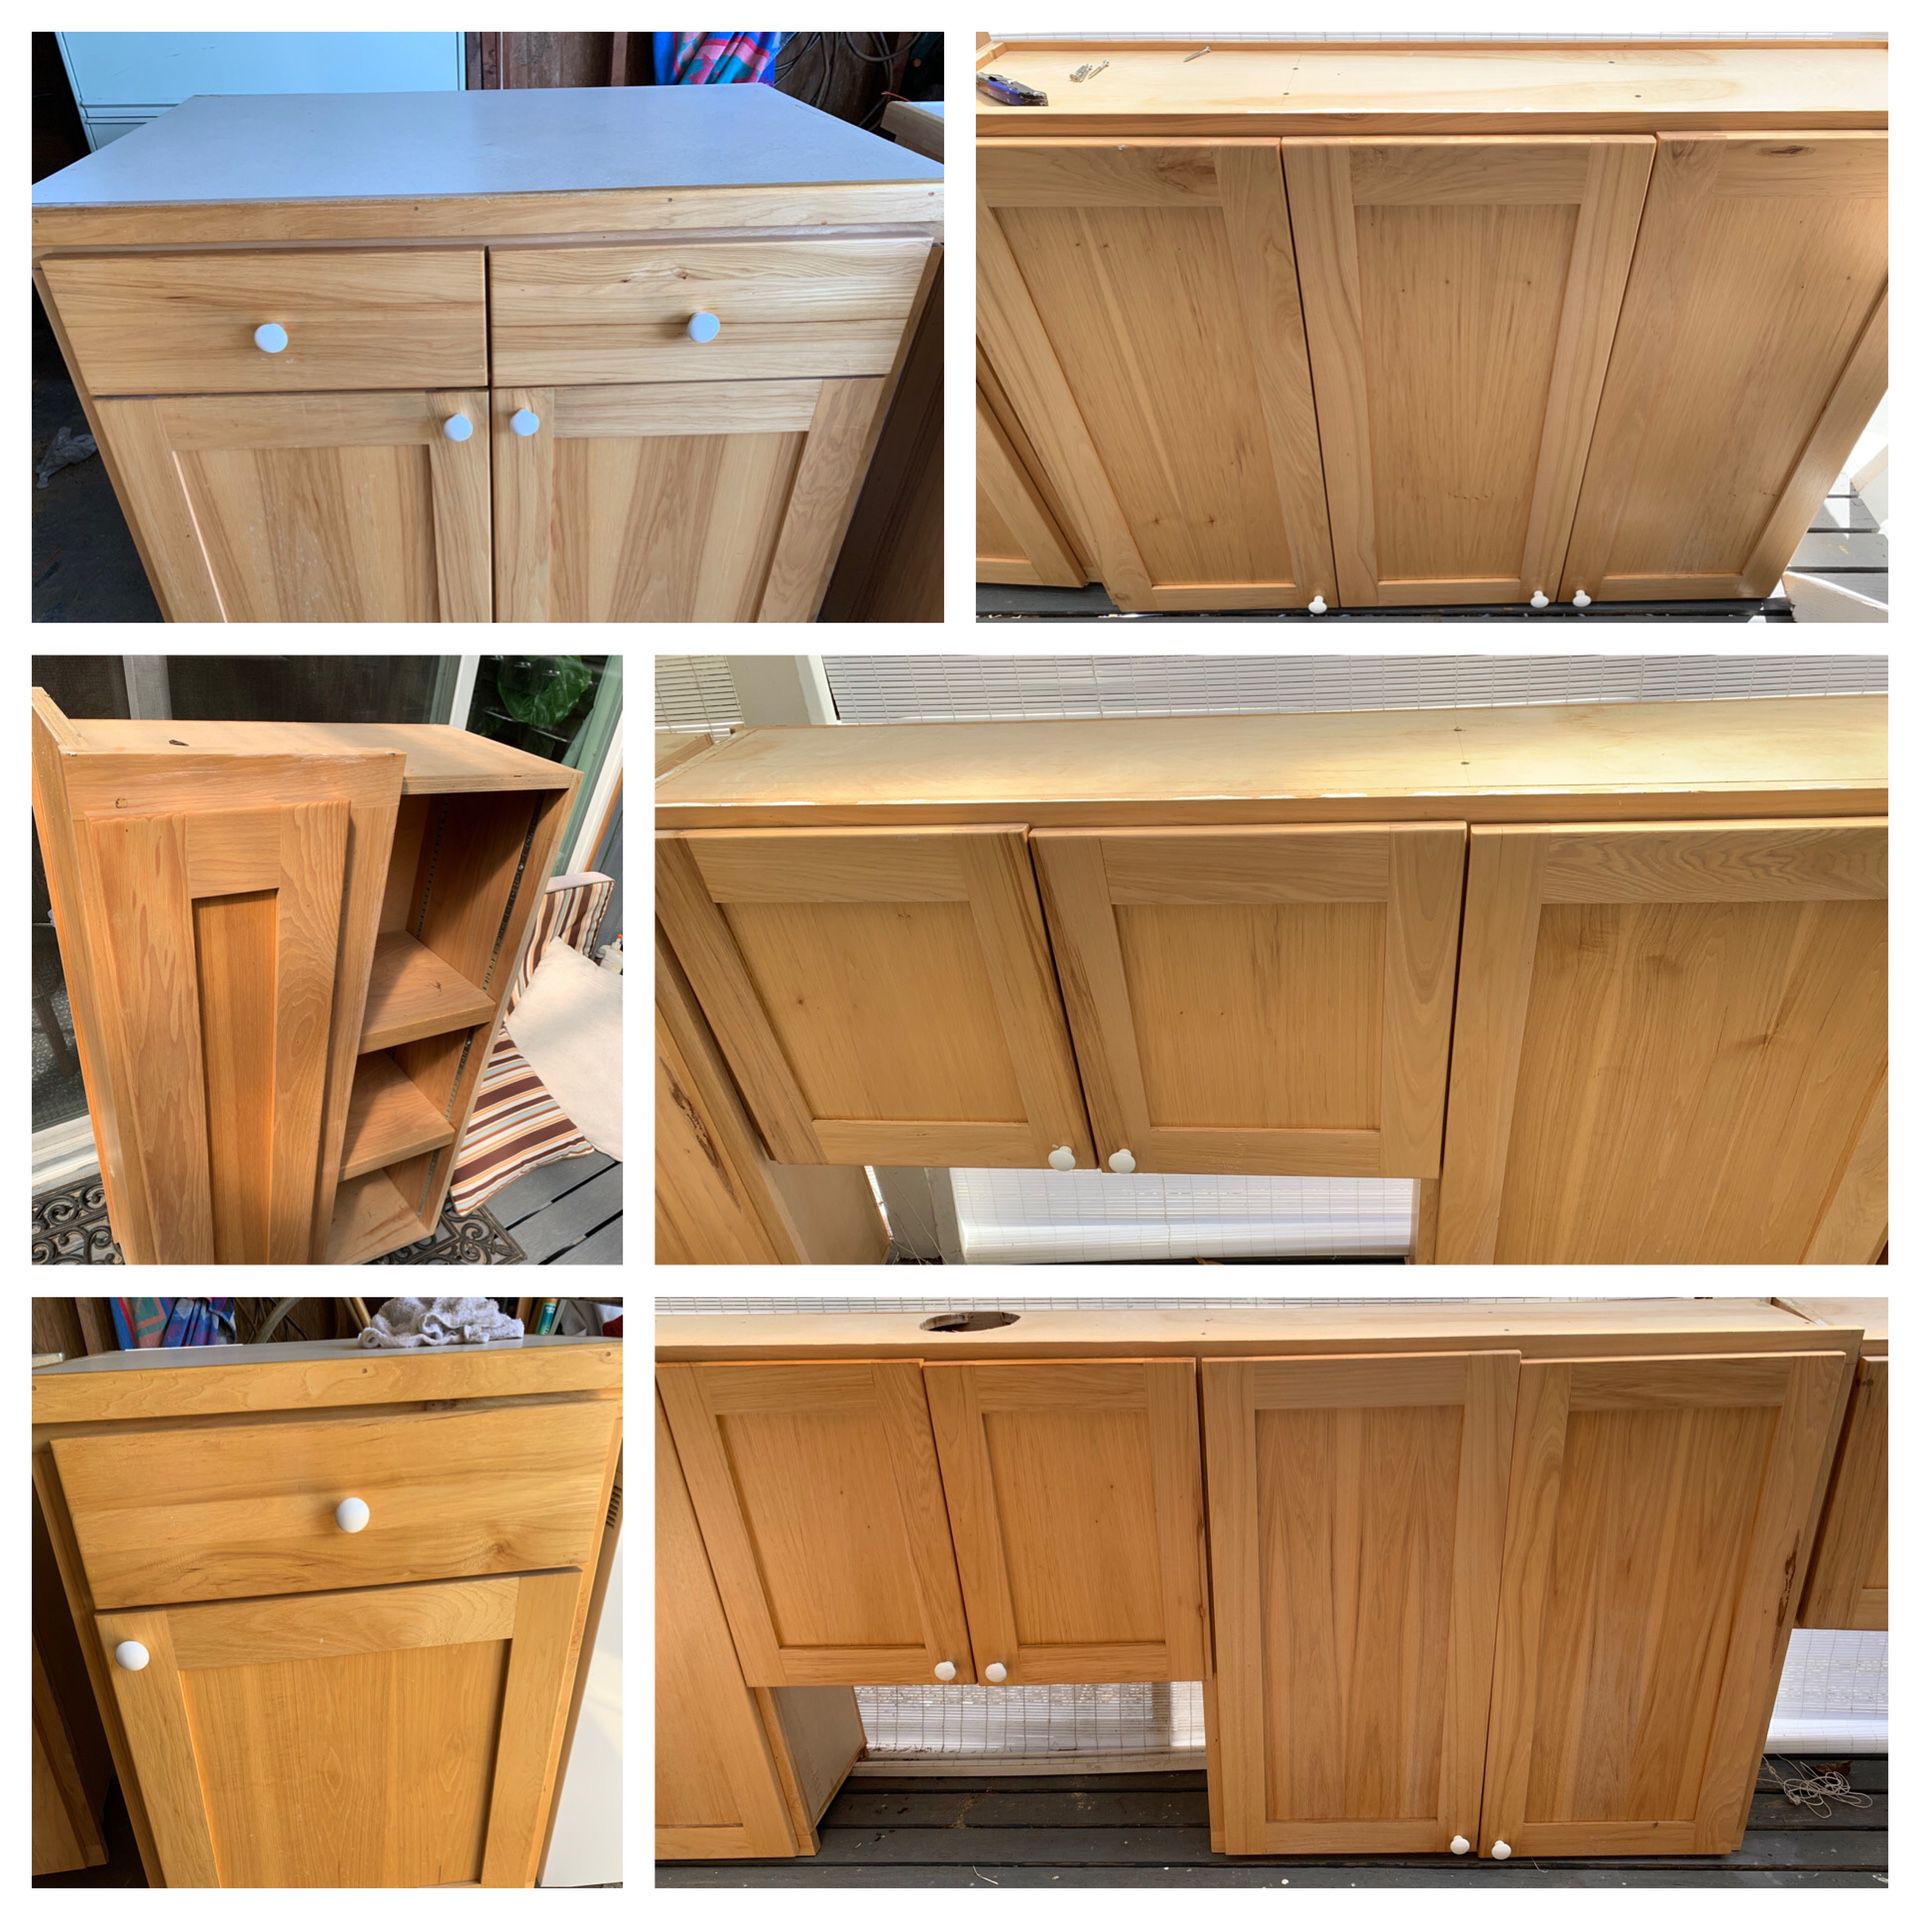 REDUCED PRICE! HICKORY KITCHEN CABINETS